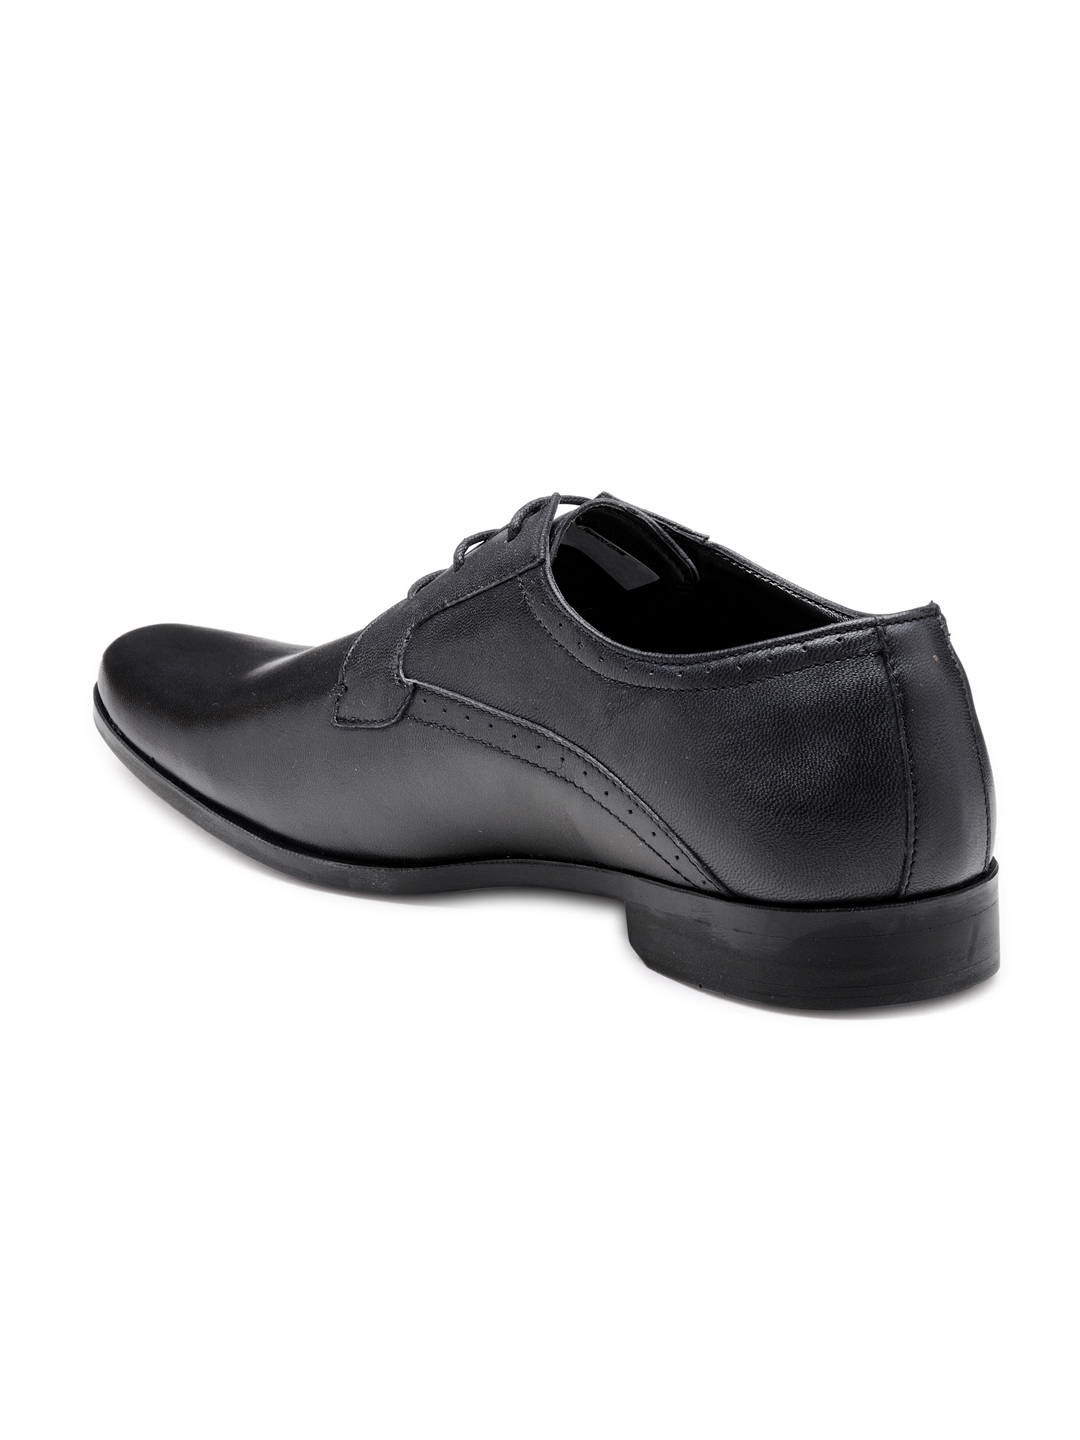 Franco Leone Mens Leather Formal Shoes